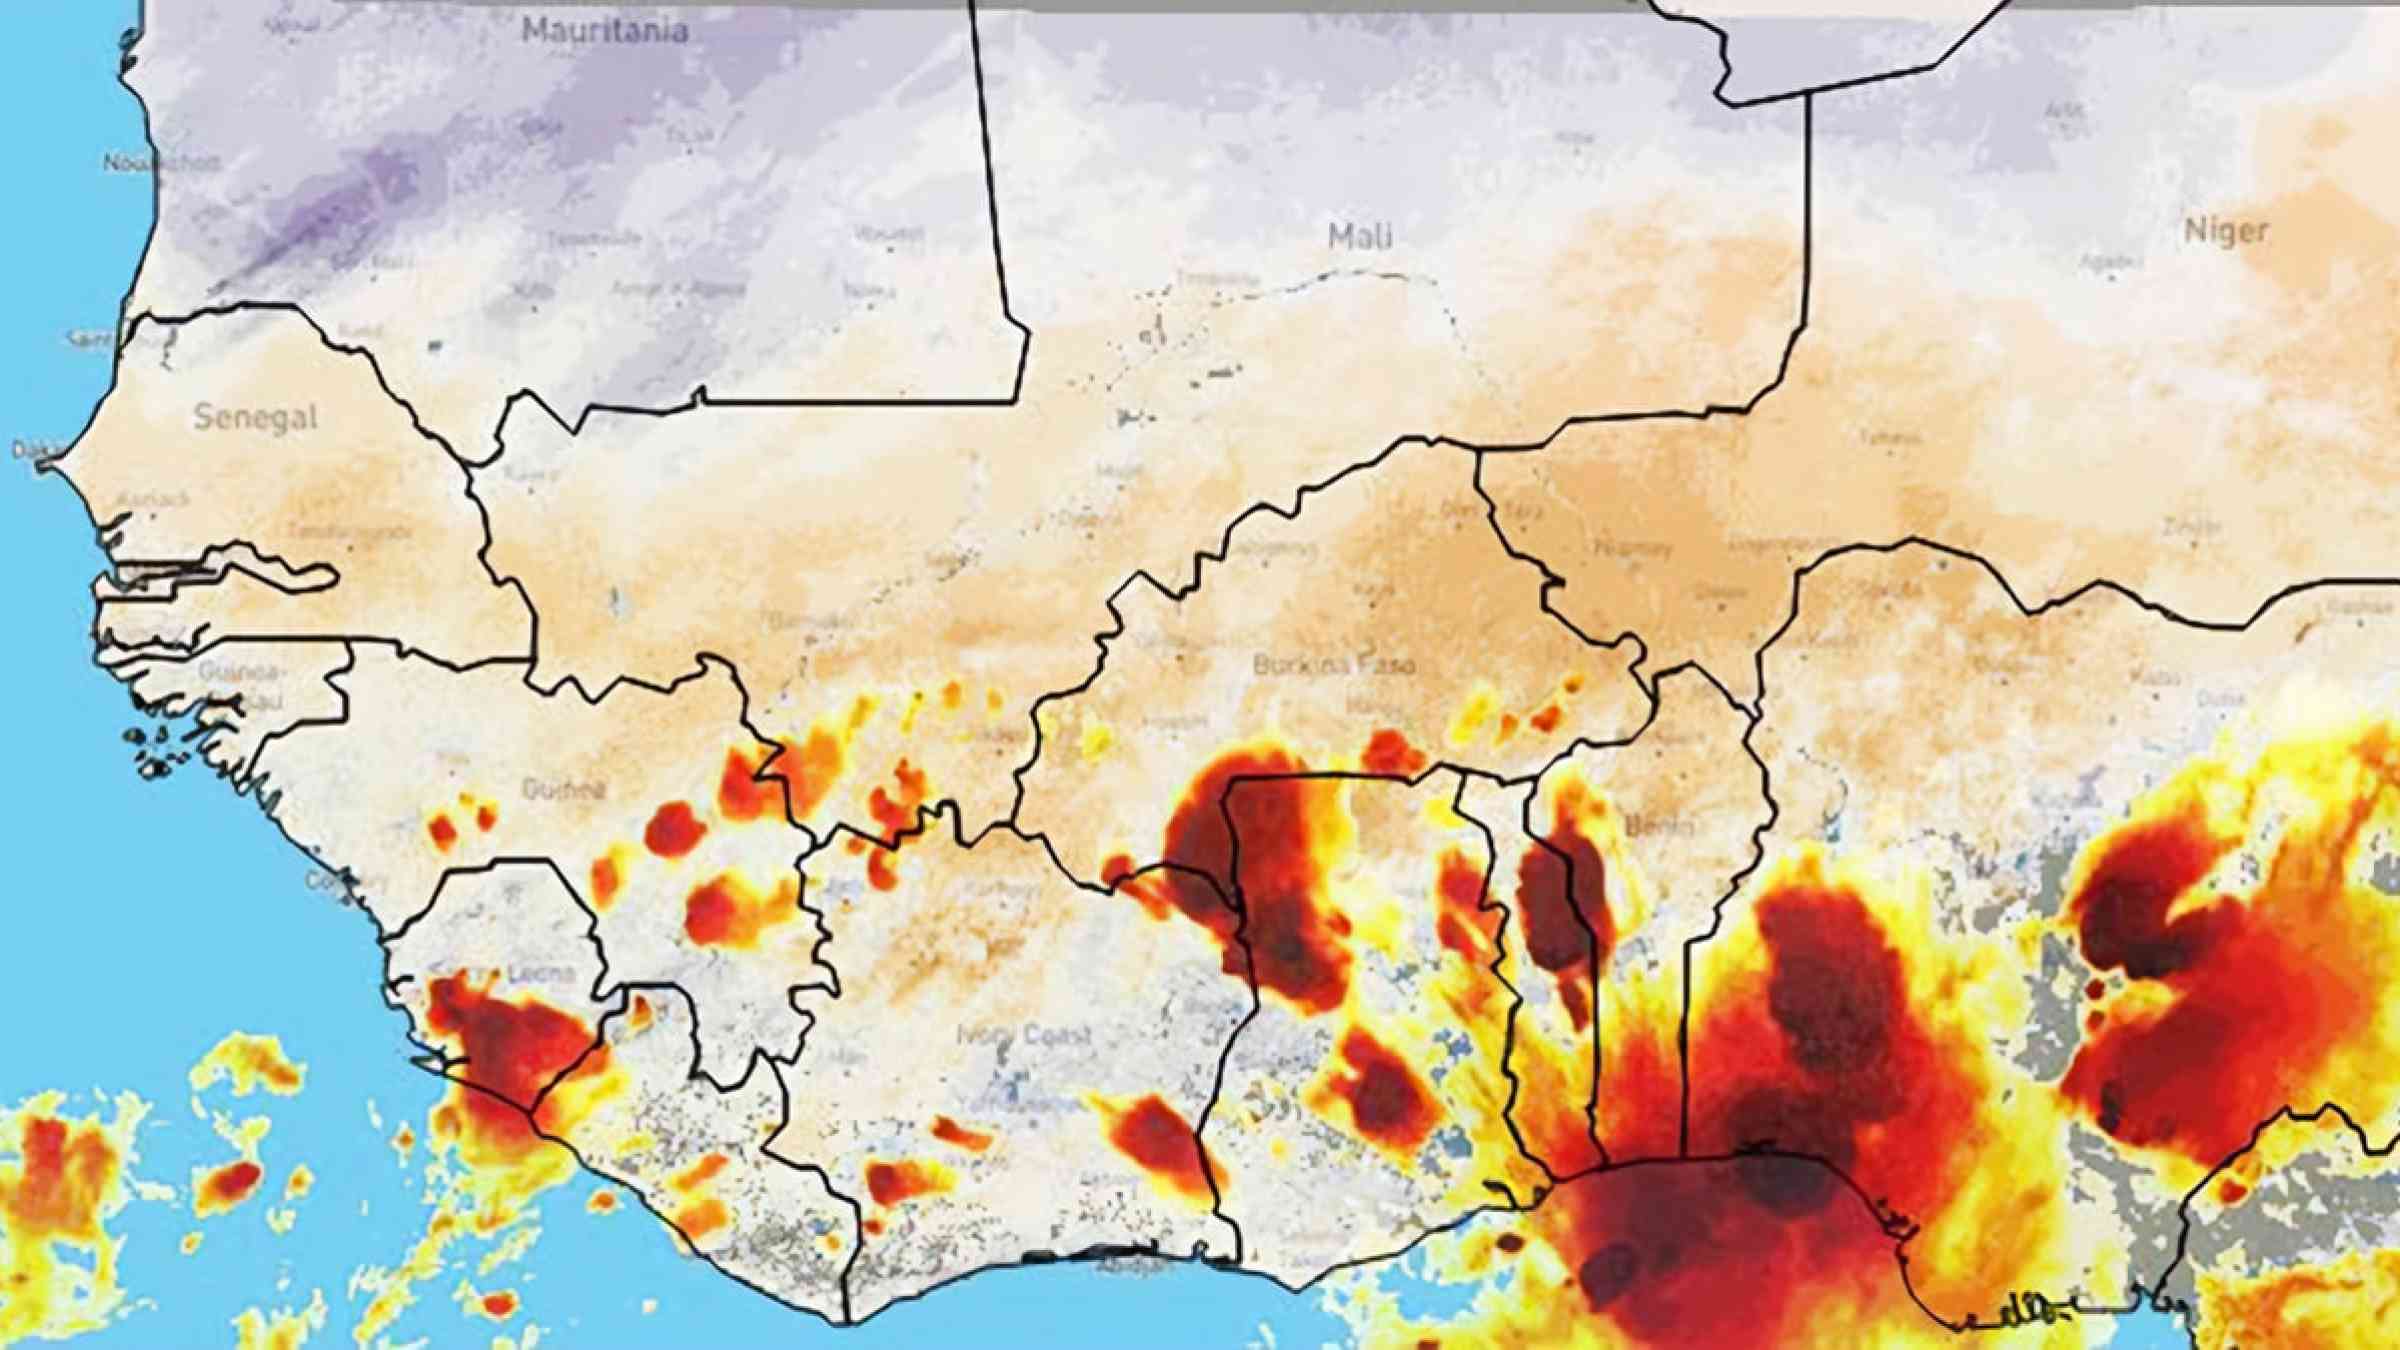 Image from the portal shows storms across West Africa on 27 April 2022